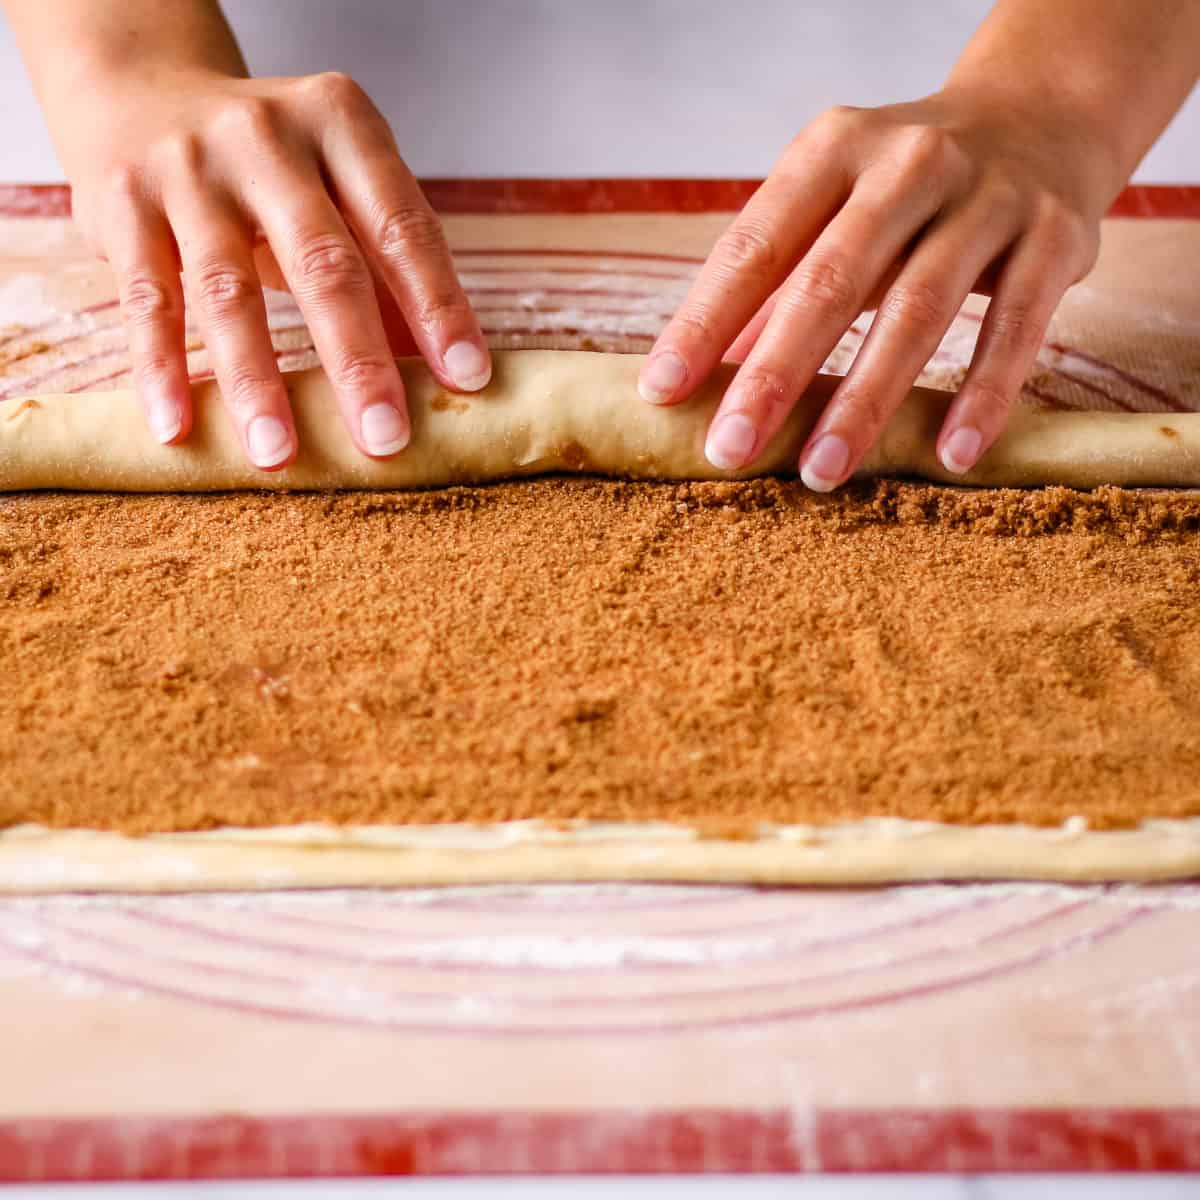 Tightly rolling up the dough into a log.